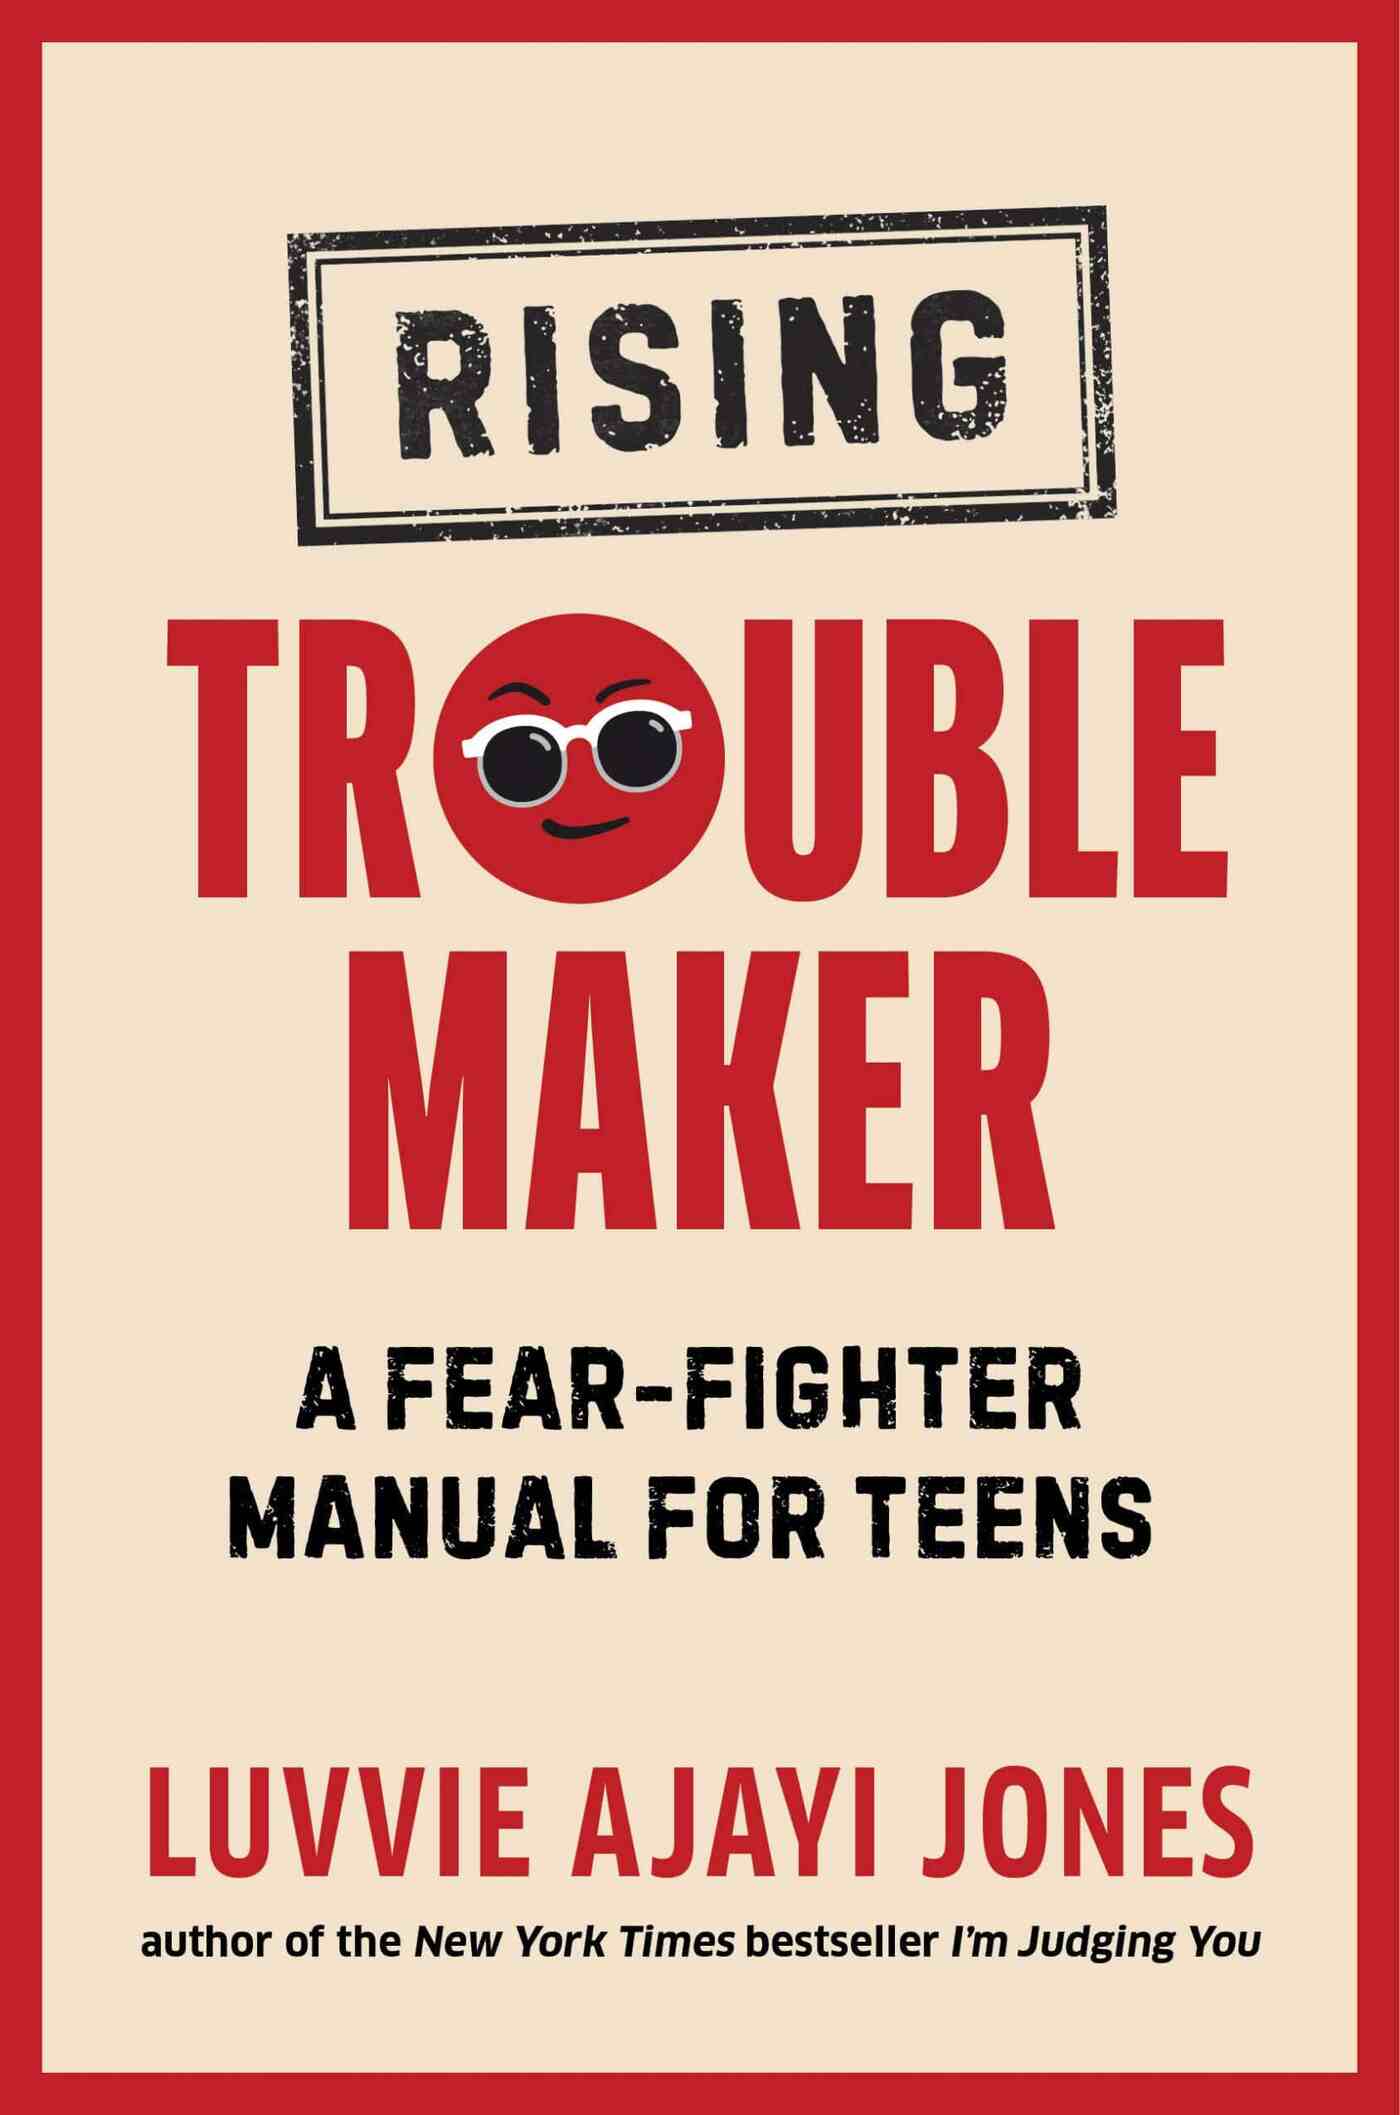 Rising Troublemaker: A Fear-Fighter Manual for Teens - Cover